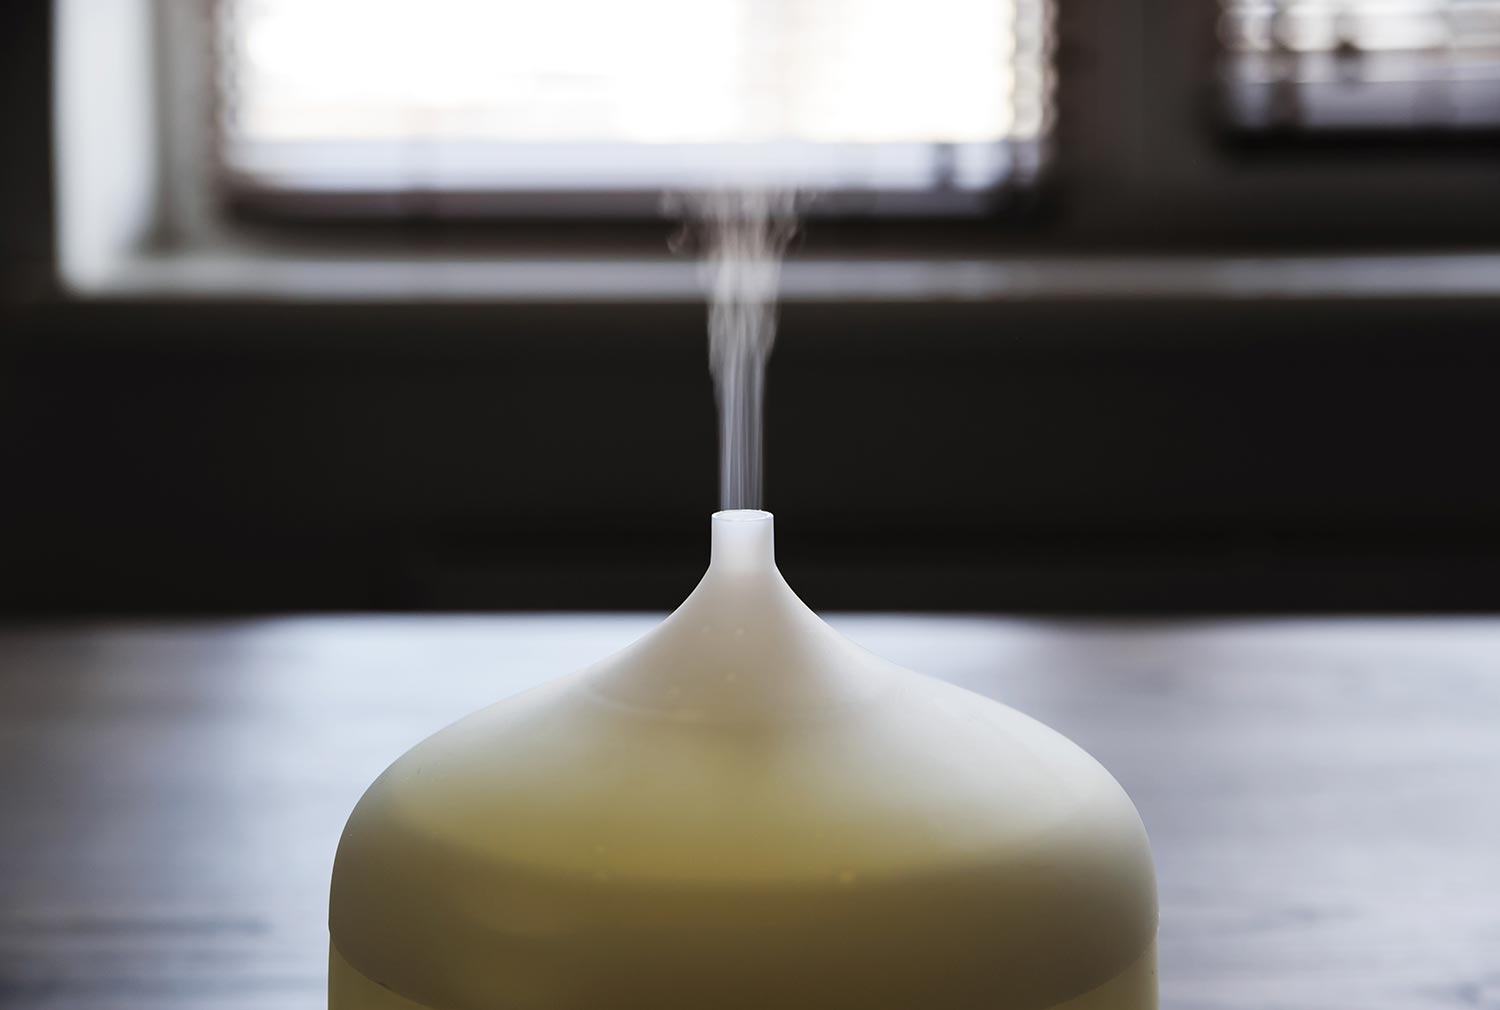 The cold steam is flowing up from the aroma diffuser